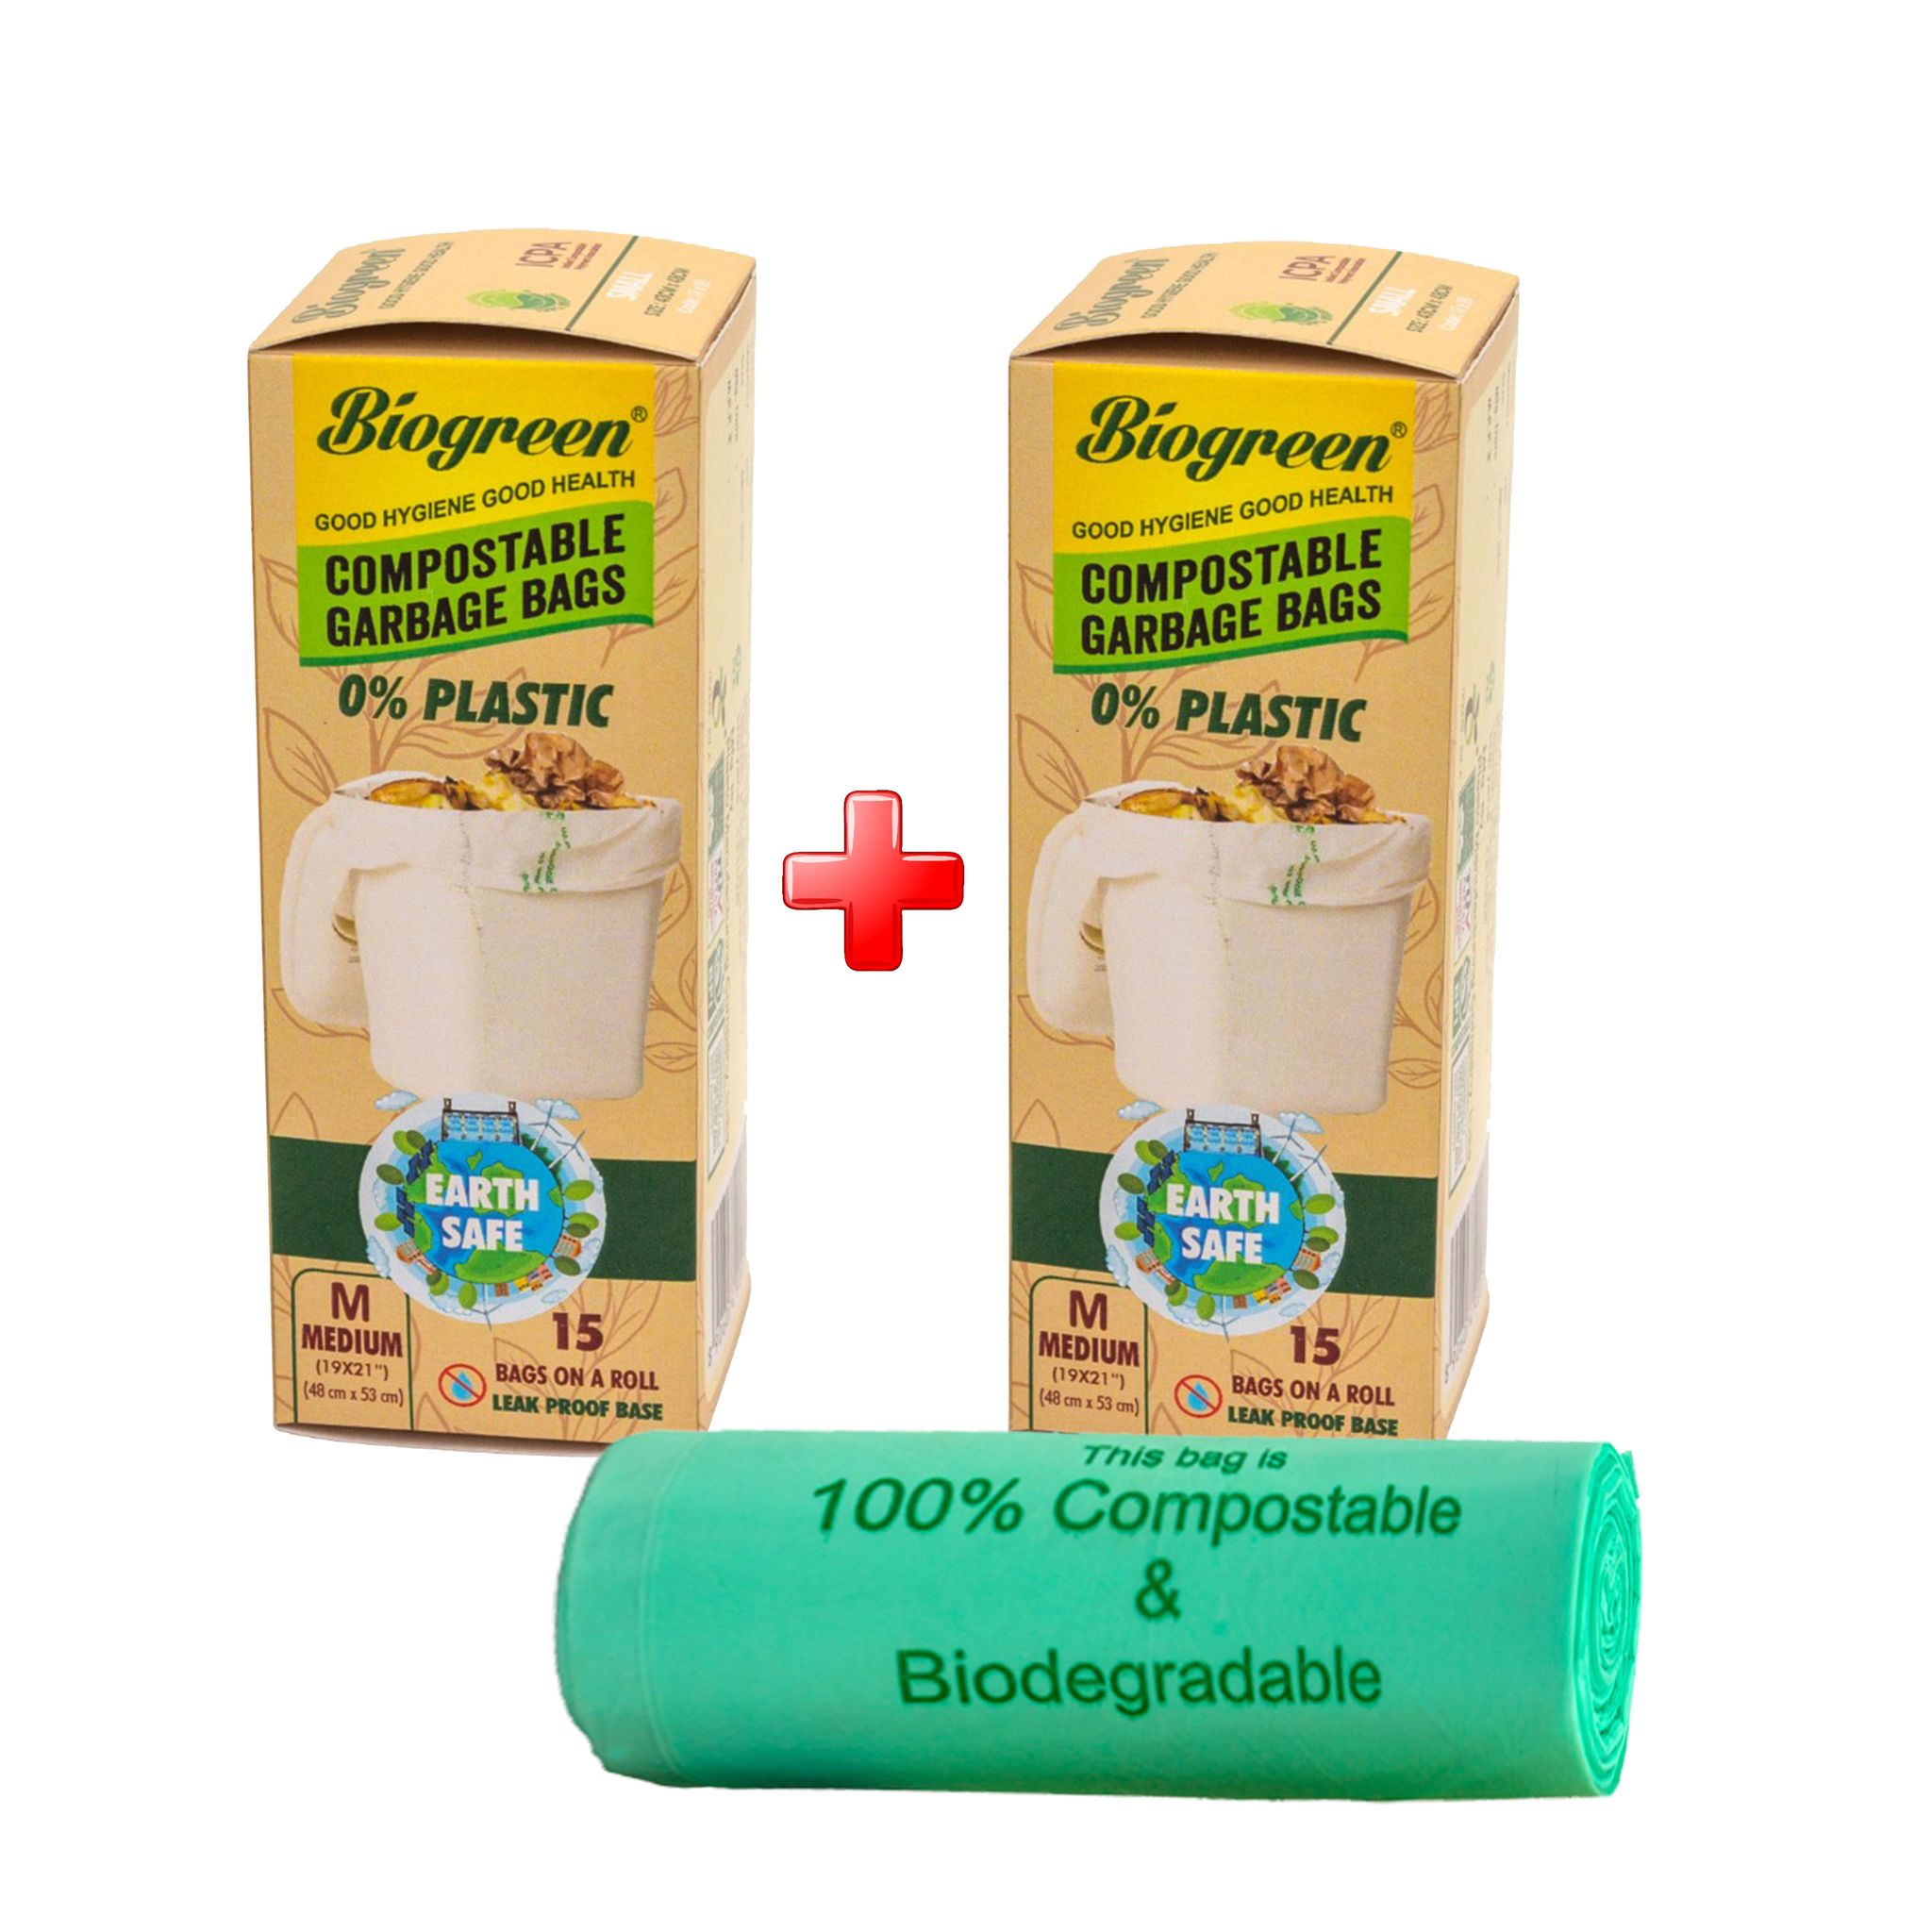 Biogreen Compostable Garbage Bag | Compostable Garbage bags | | single pack 15 Bags in each roll | 19 x 21 (in inches) Medium Size | Reusable